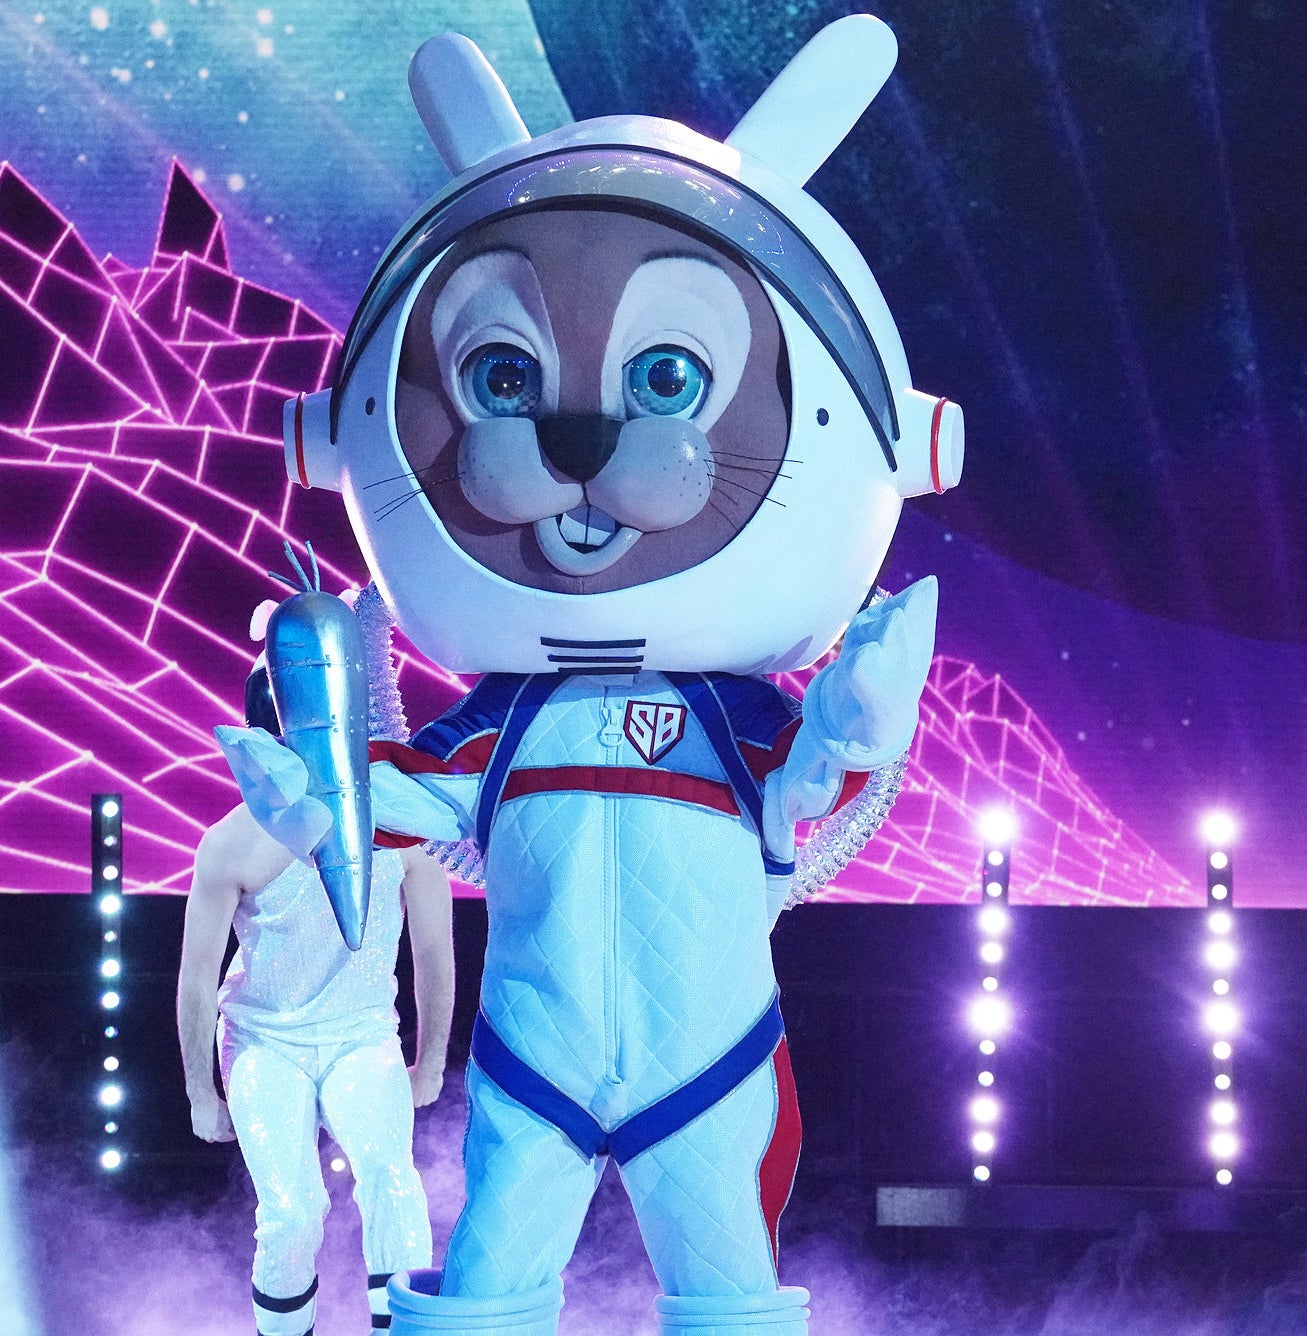 A bunny in a space outfit